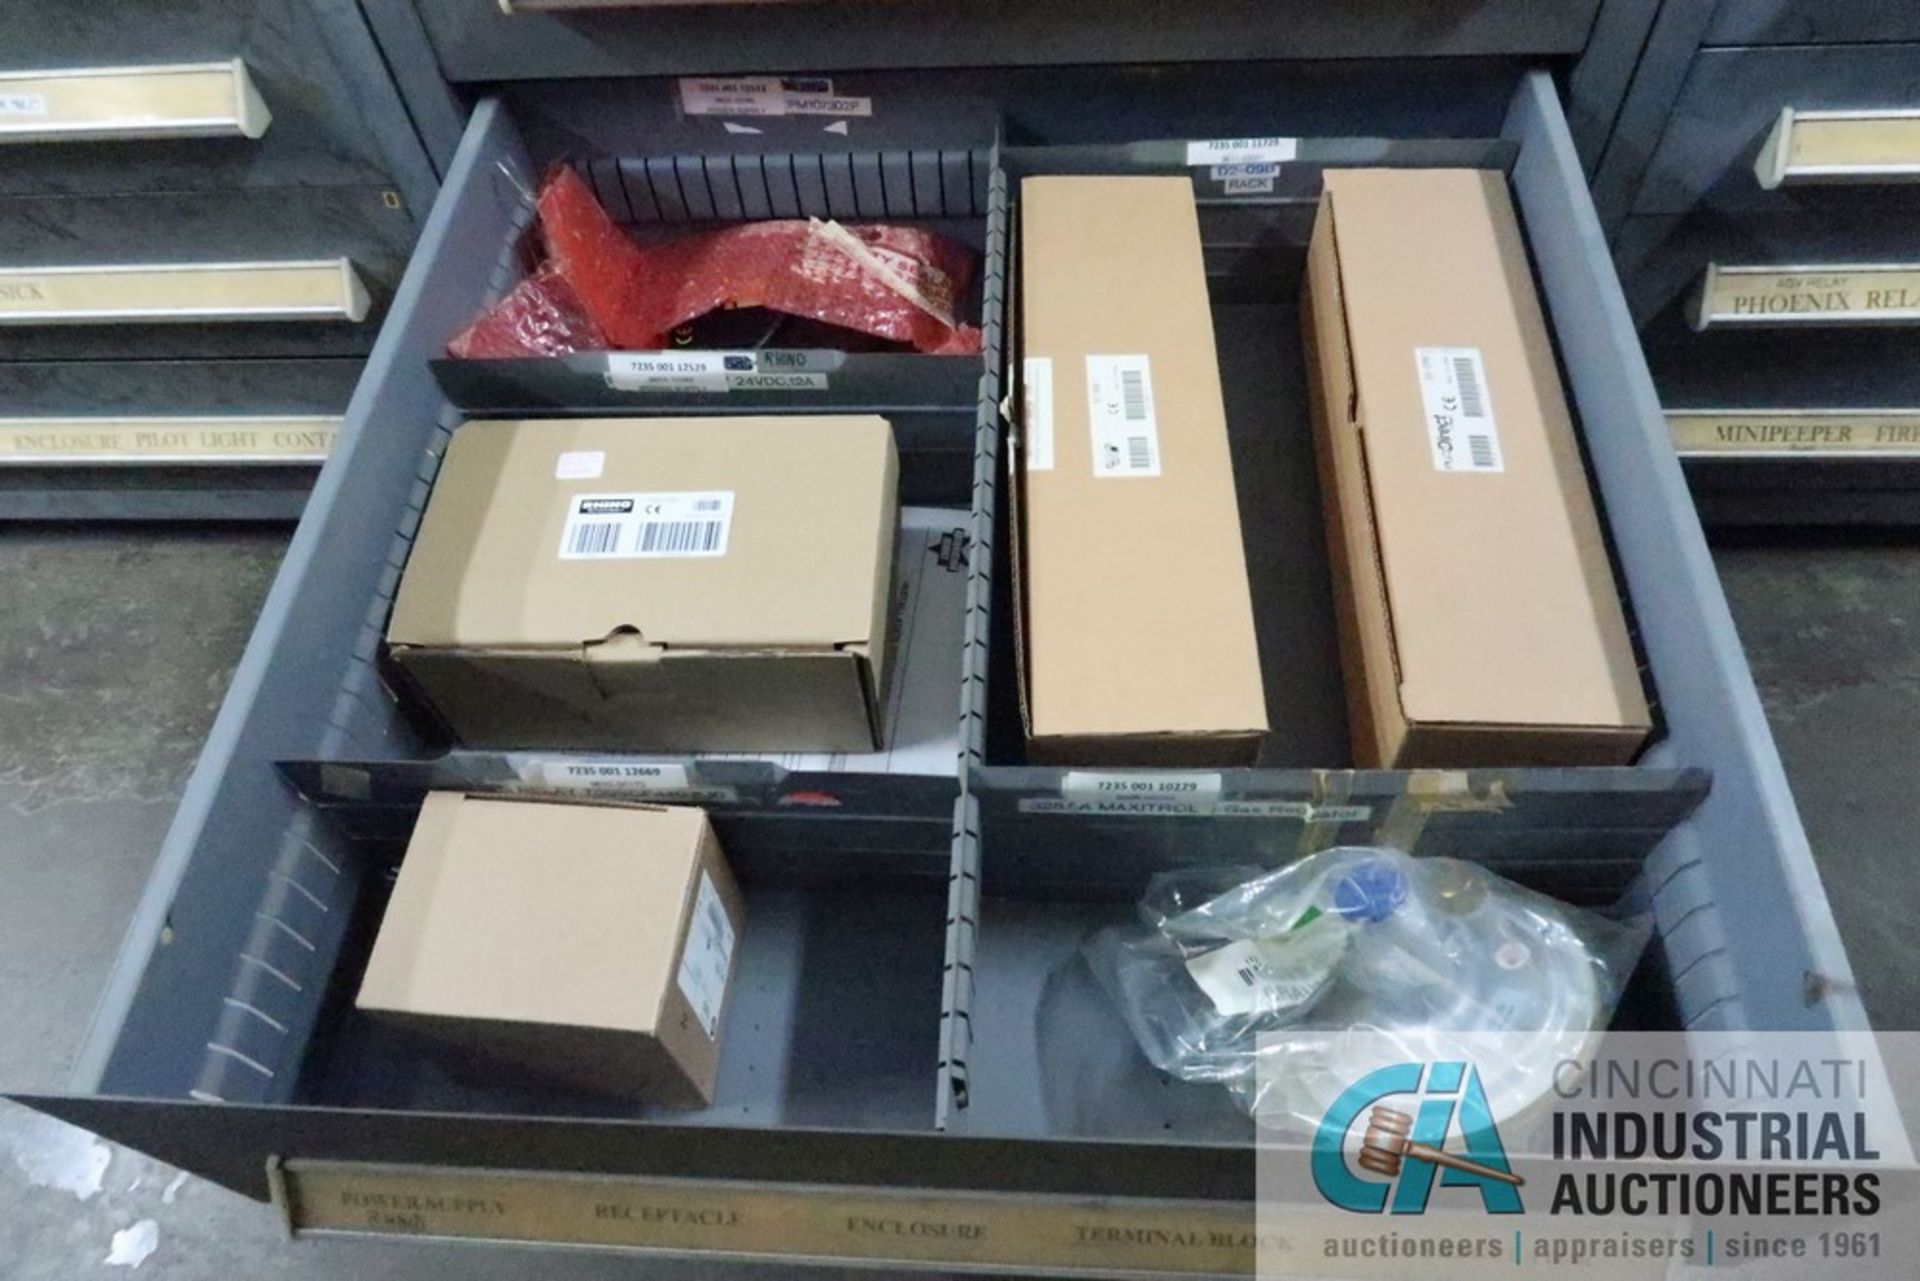 9-DRAWER LISTA CABINET WITH CONTENTS INCLUDING MISCELLANEOUS GAS VALVES, IGNITERS, SWITCHES, PHOTO - Image 9 of 10